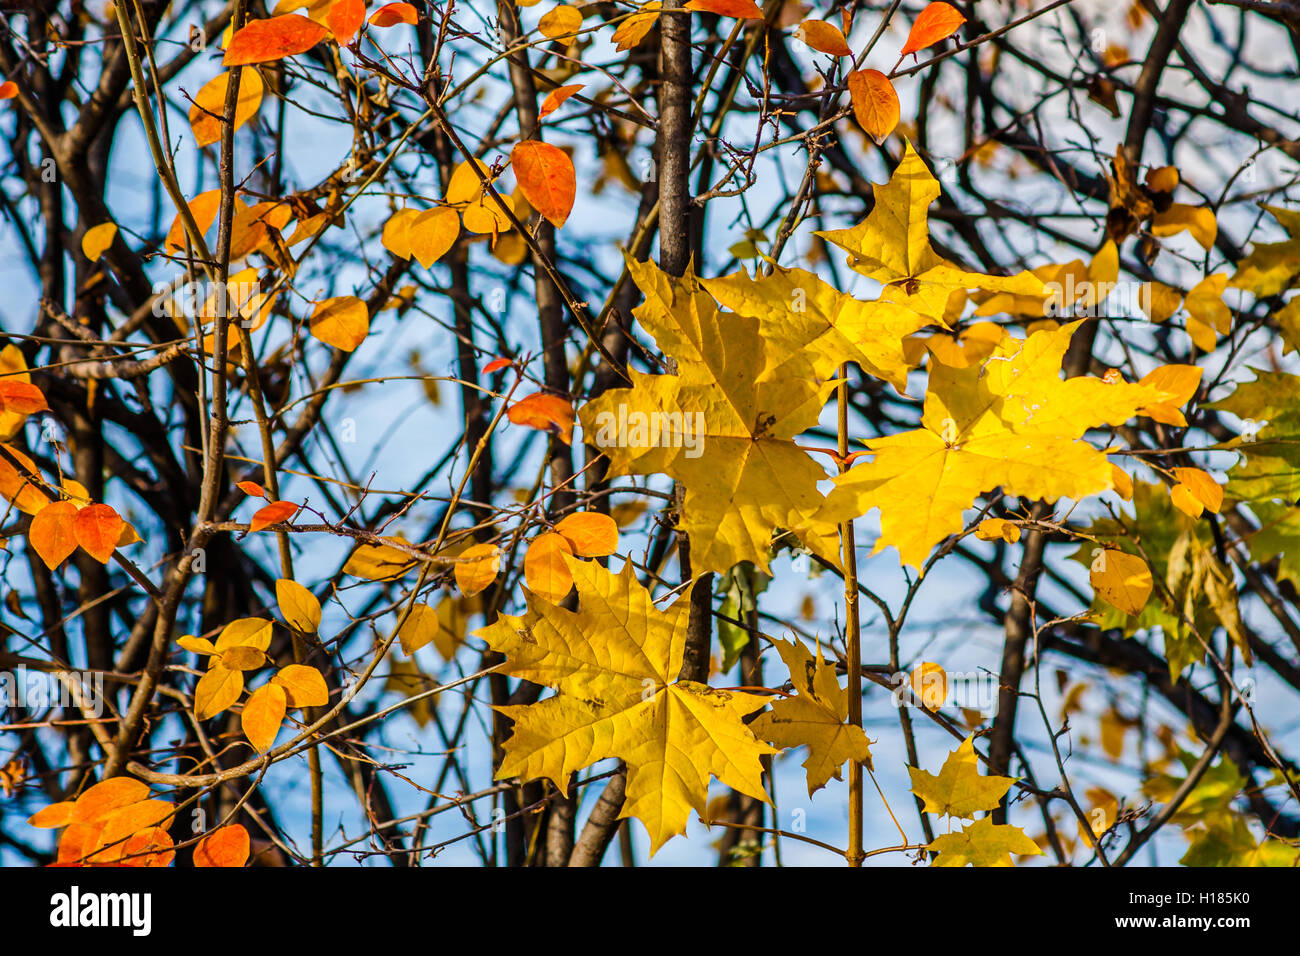 Yellow maple leaves and orange dogwood or cotoneaster leaves in autumn against the background of dark branches and twigs of a co Stock Photo